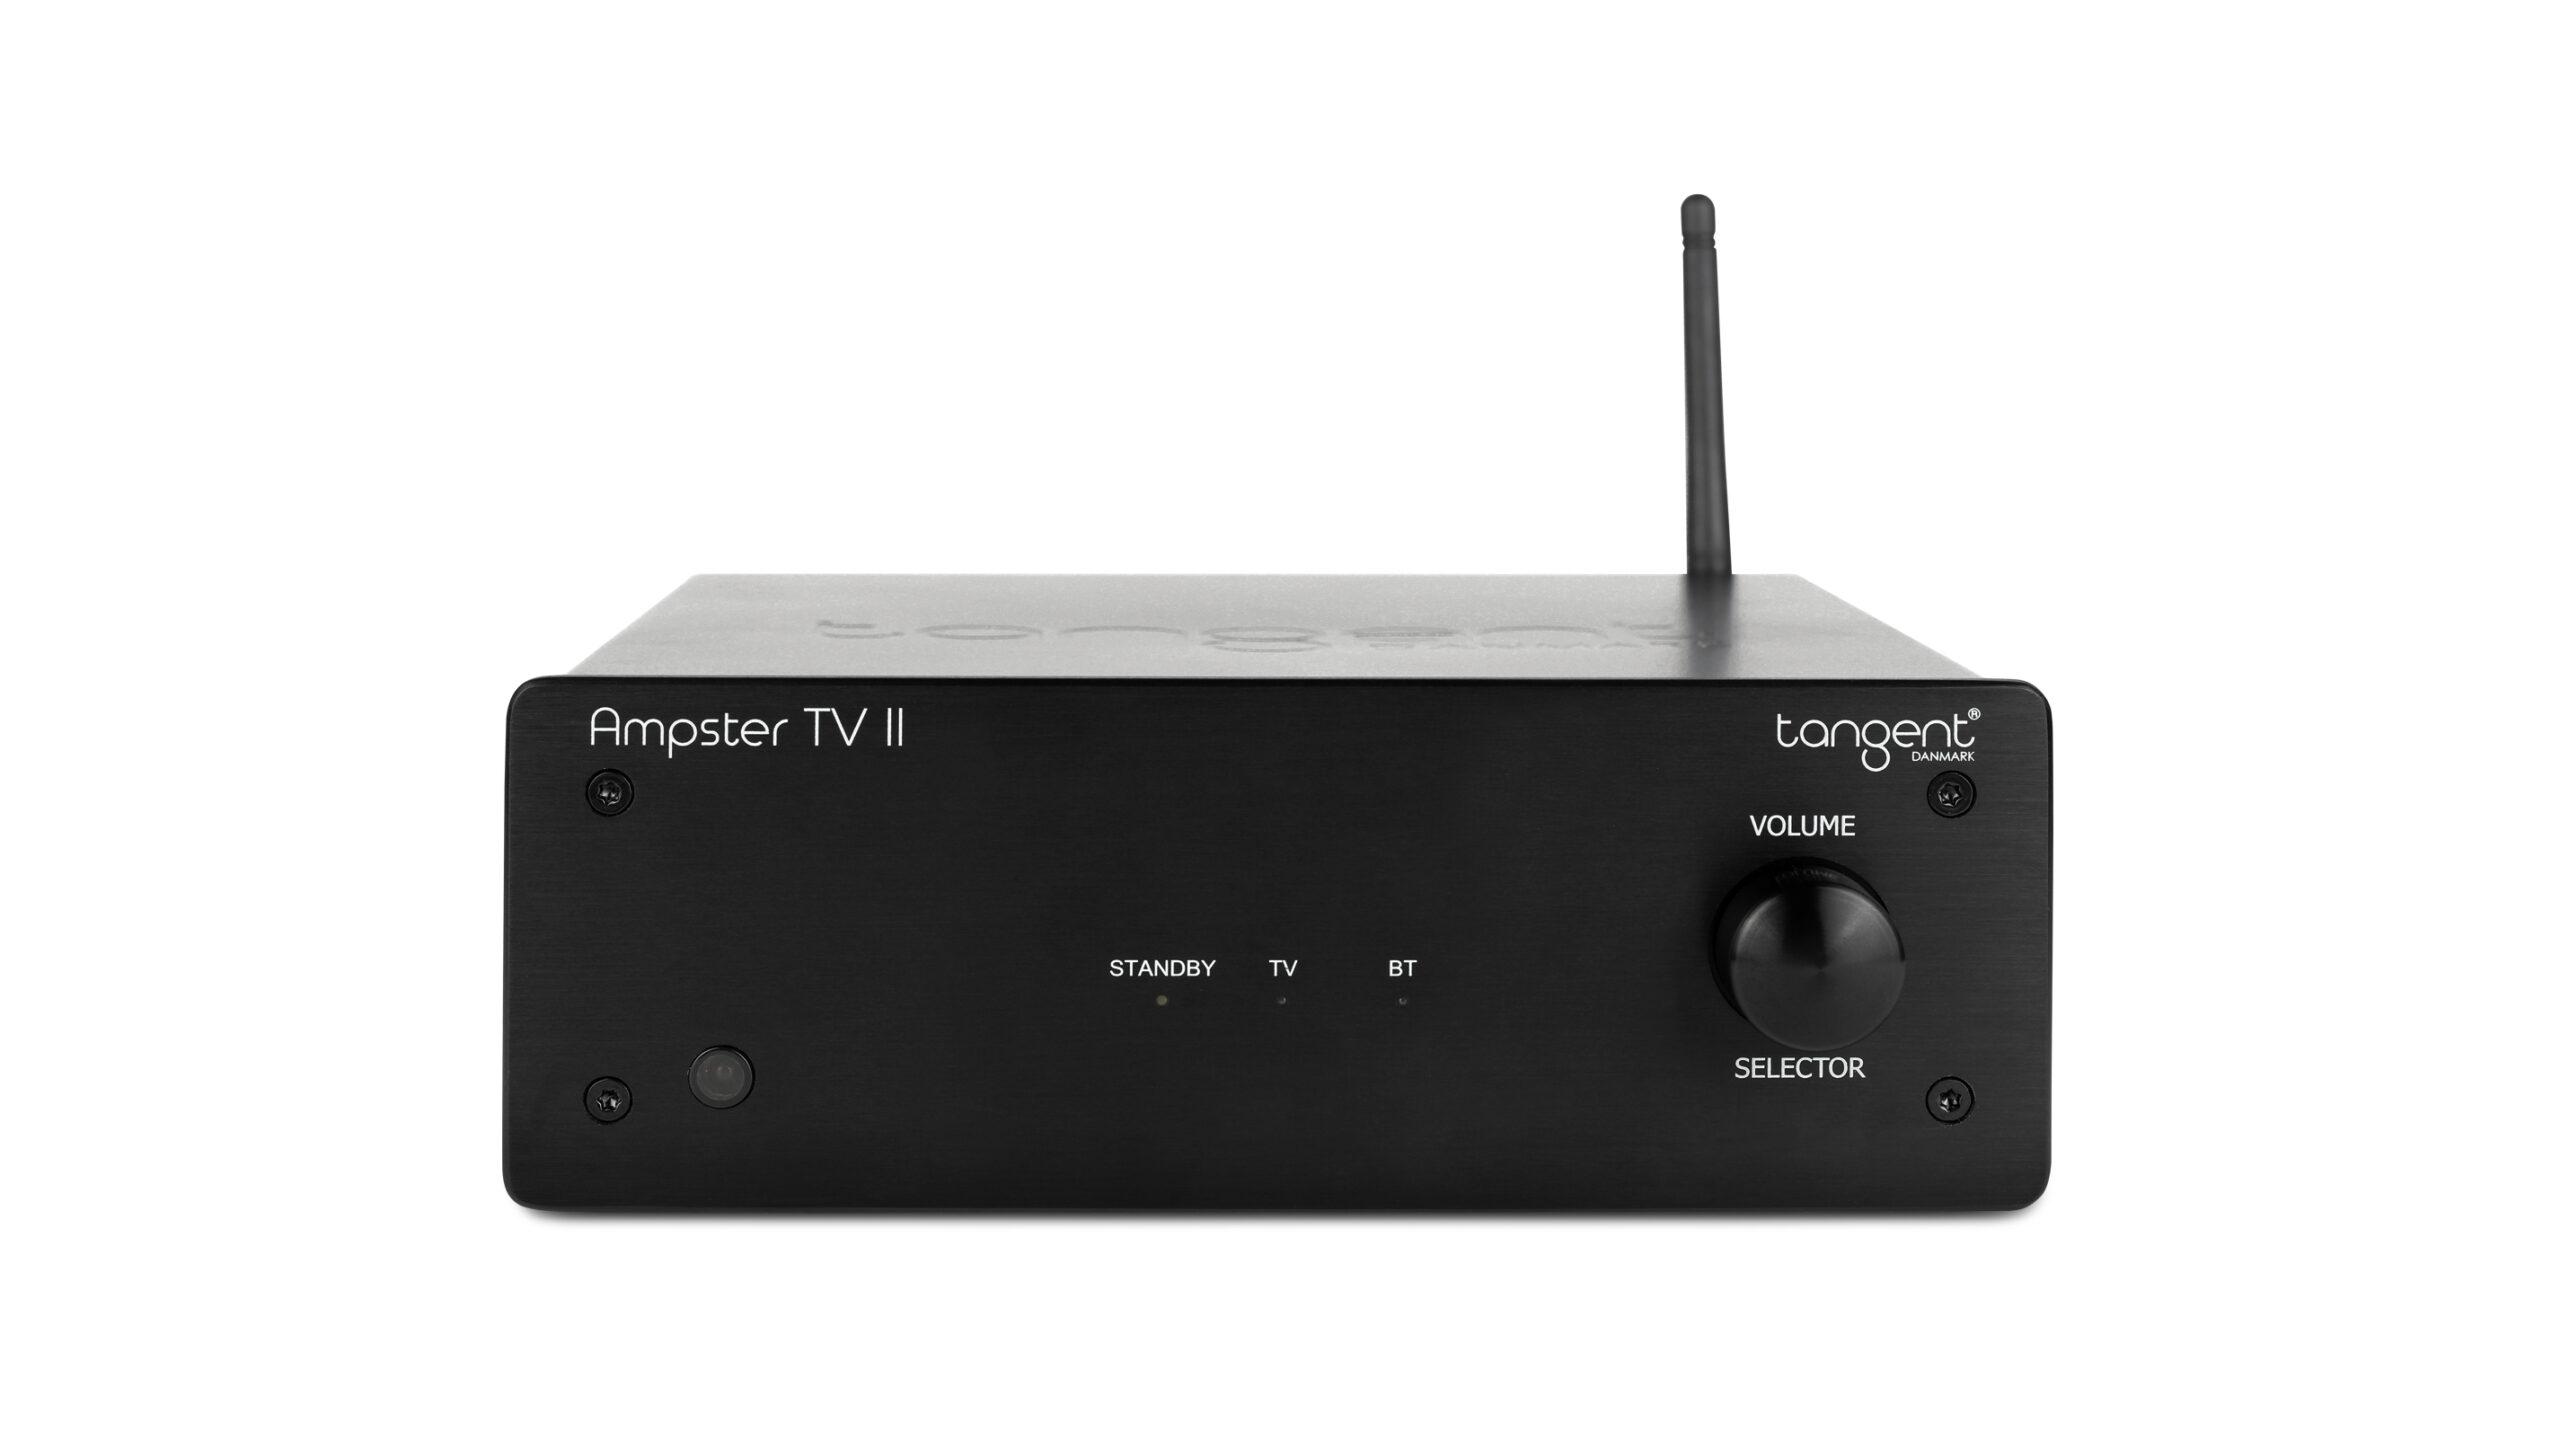 Tangent Ampster TV II front